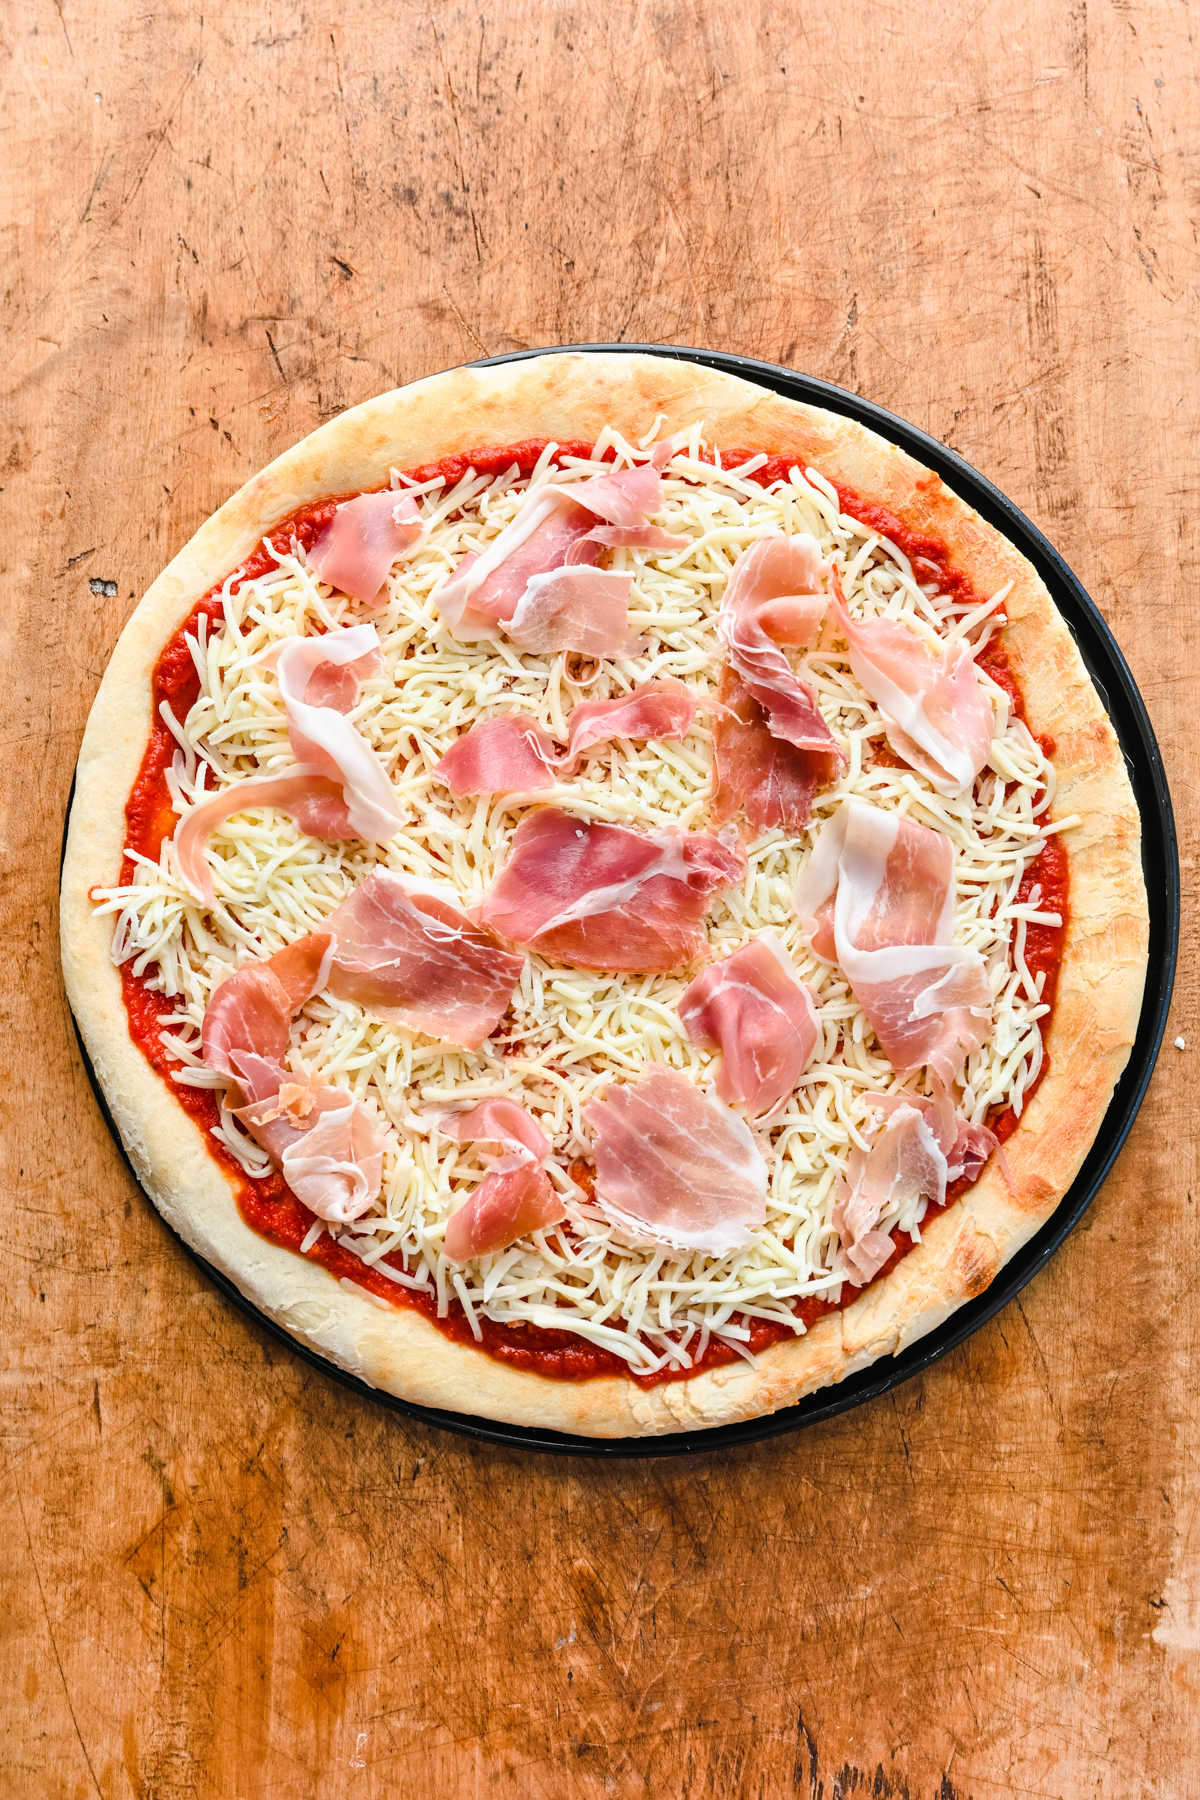 Par baked pizza crust topped with pizza sauce mozzarella and prosciutto.